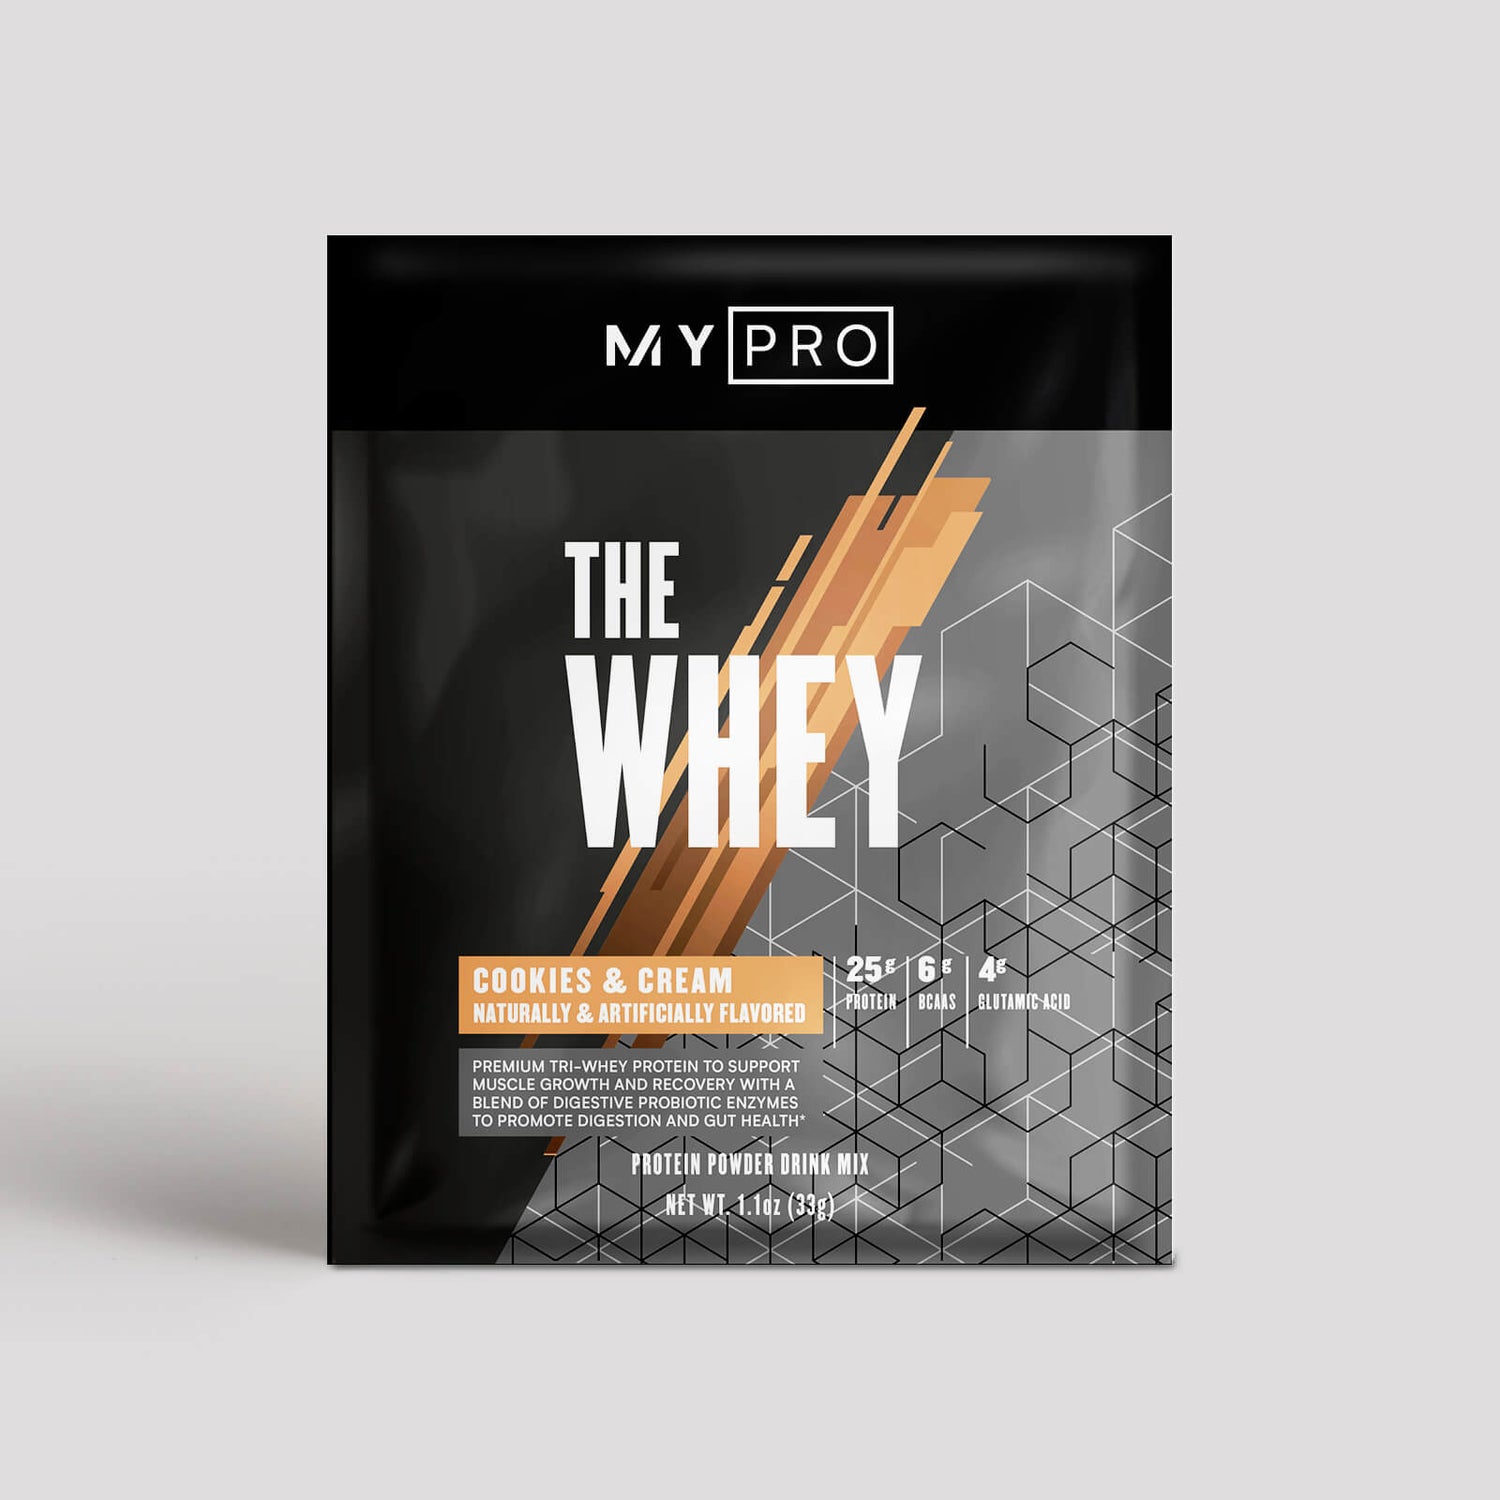 Myprotein THEWHEY (USA) (Sample) - 1.13Oz - Cookies and Cream